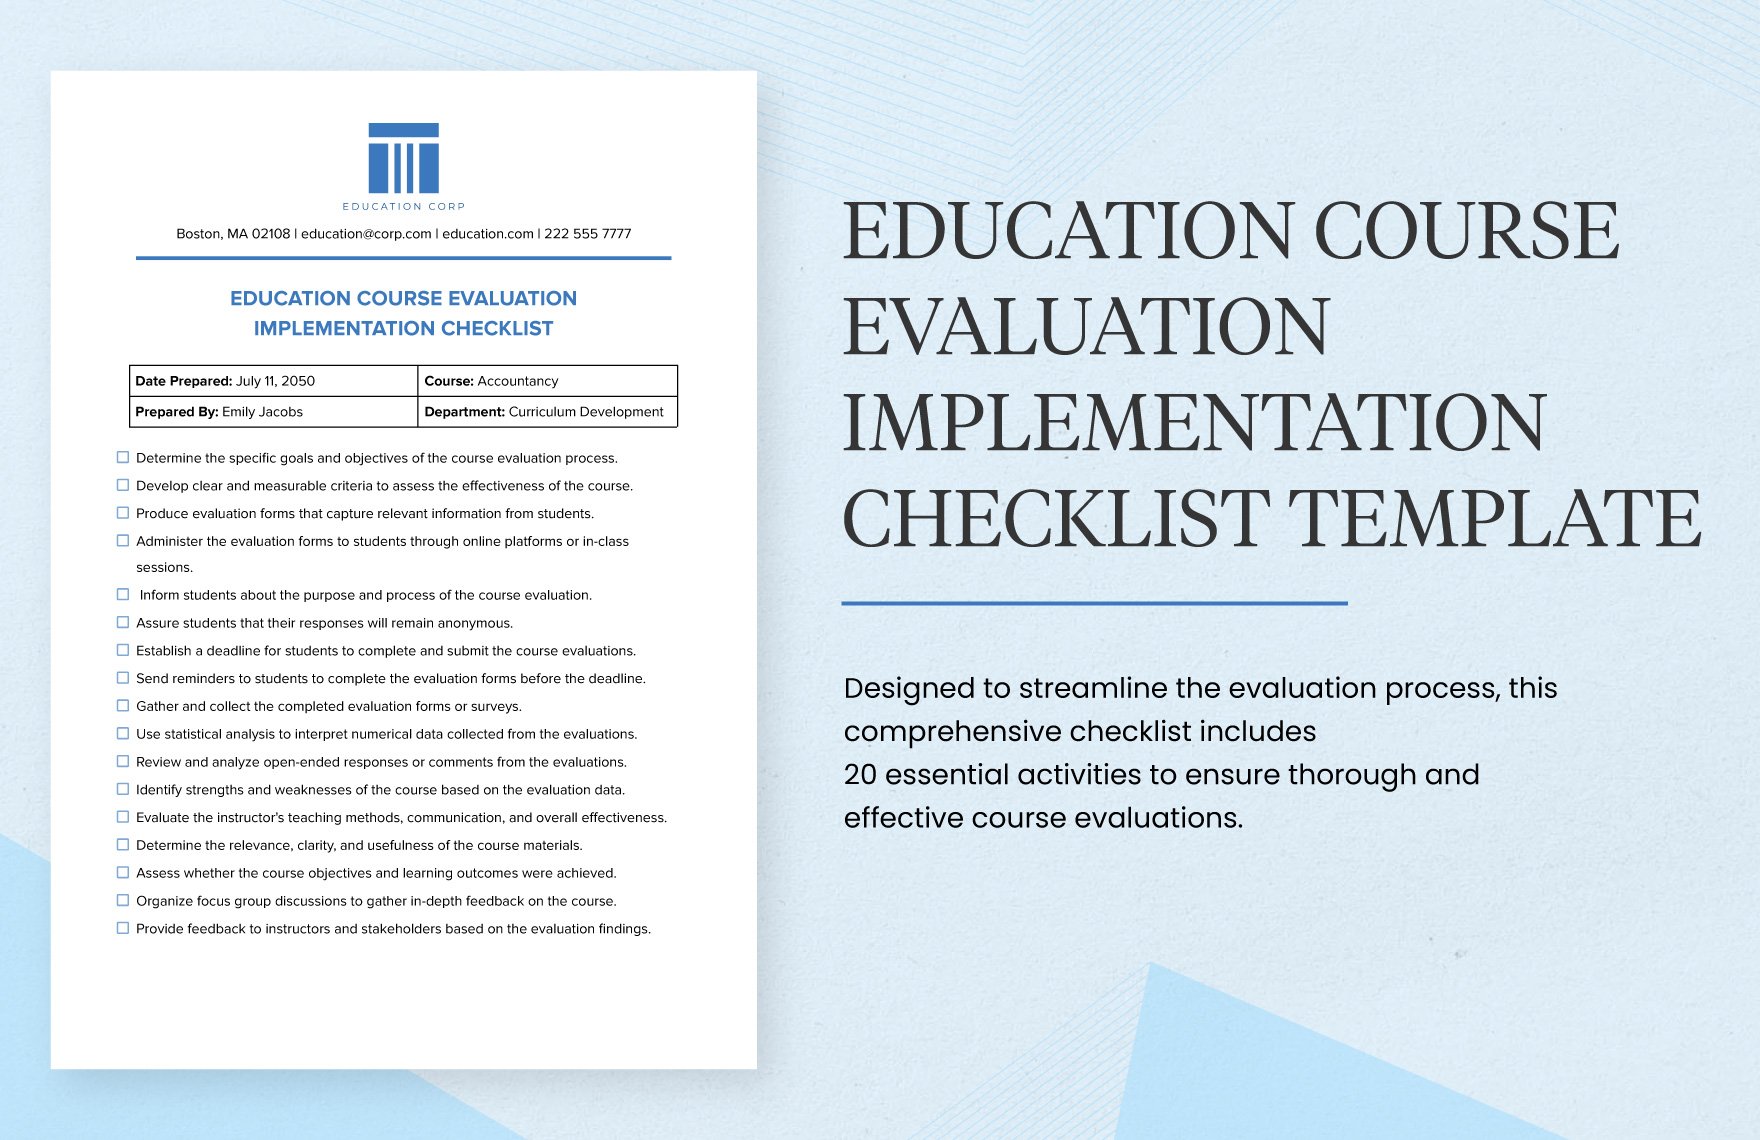 Education Course Evaluation Implementation Checklist Template in Word, Google Docs